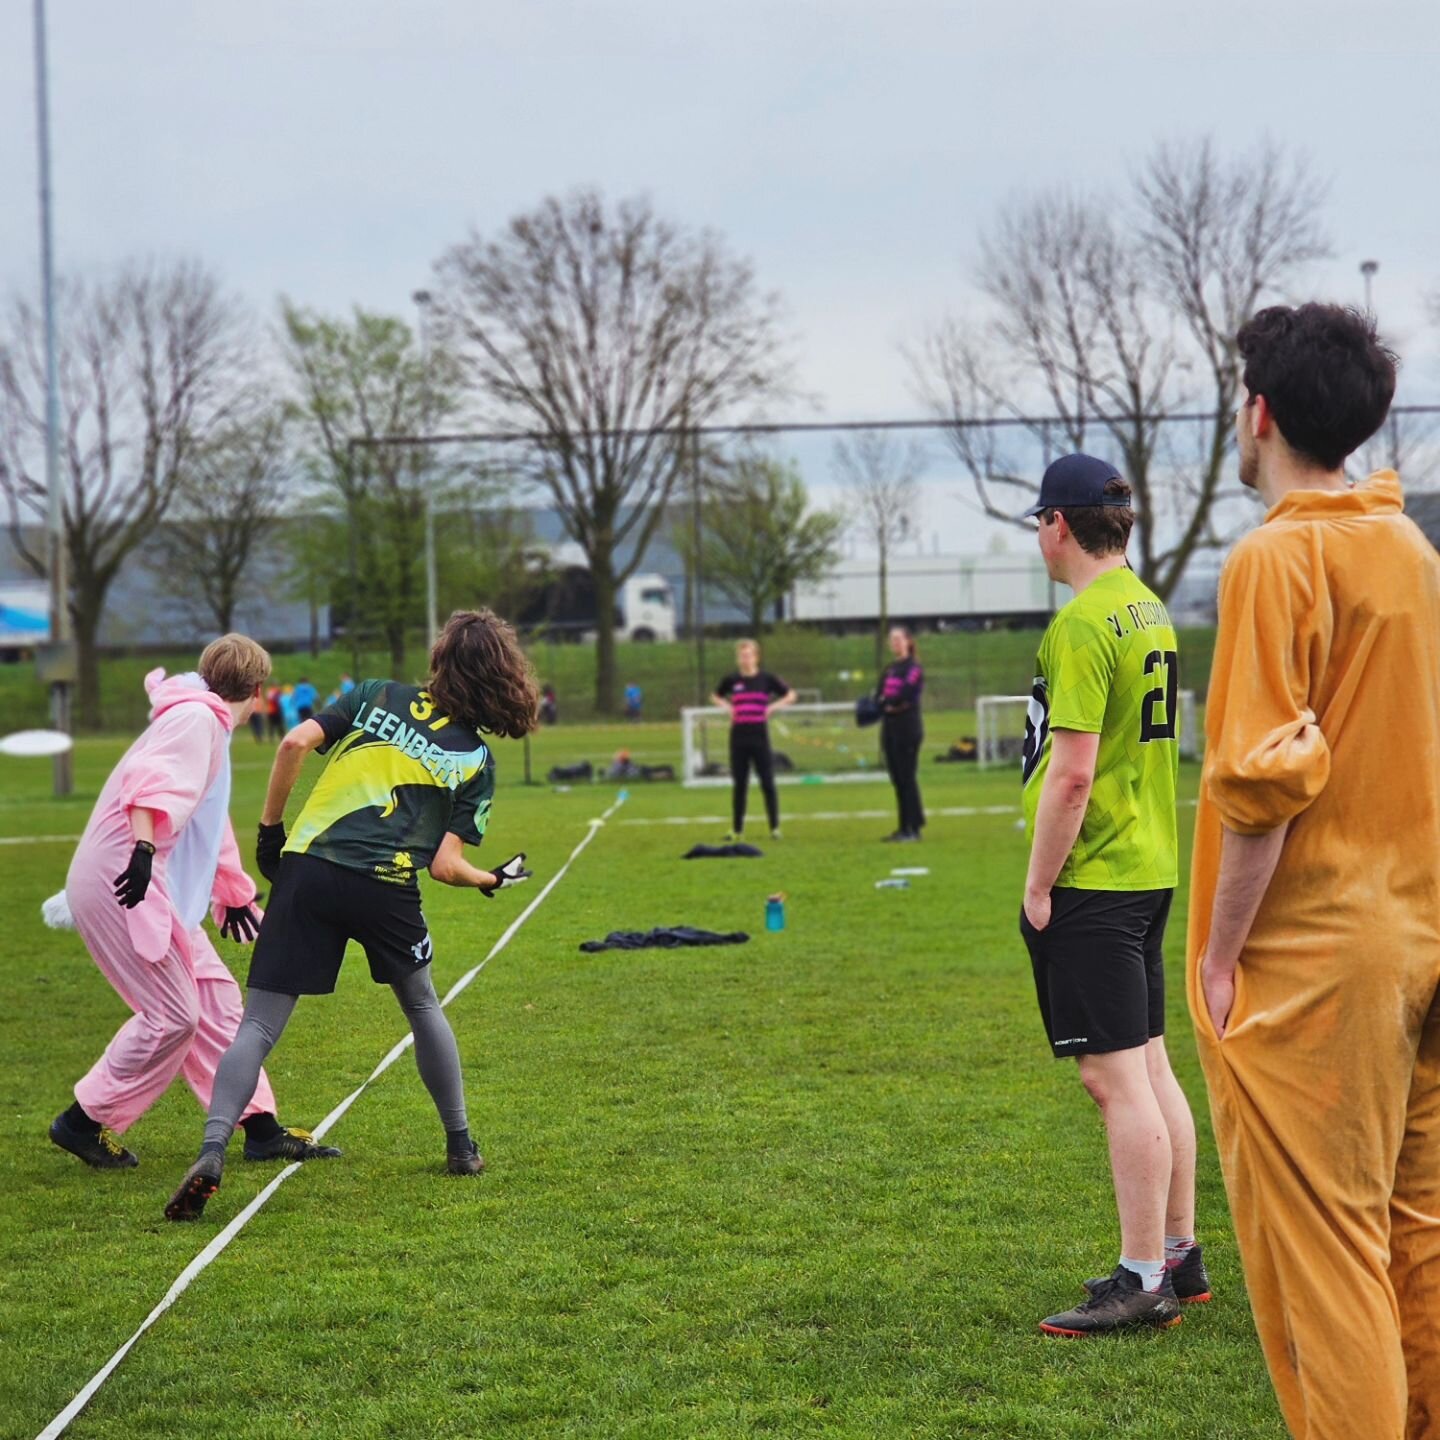 Dragon Flight 2024 edition: FLIGHT OF THE FOOLISH

Look at all these hard working easter bunnies! Together with all the other players, volunteers, supporters and the dry weather, Dragon Flight 2024 resulted an a awesome day! Thank you all for coming 